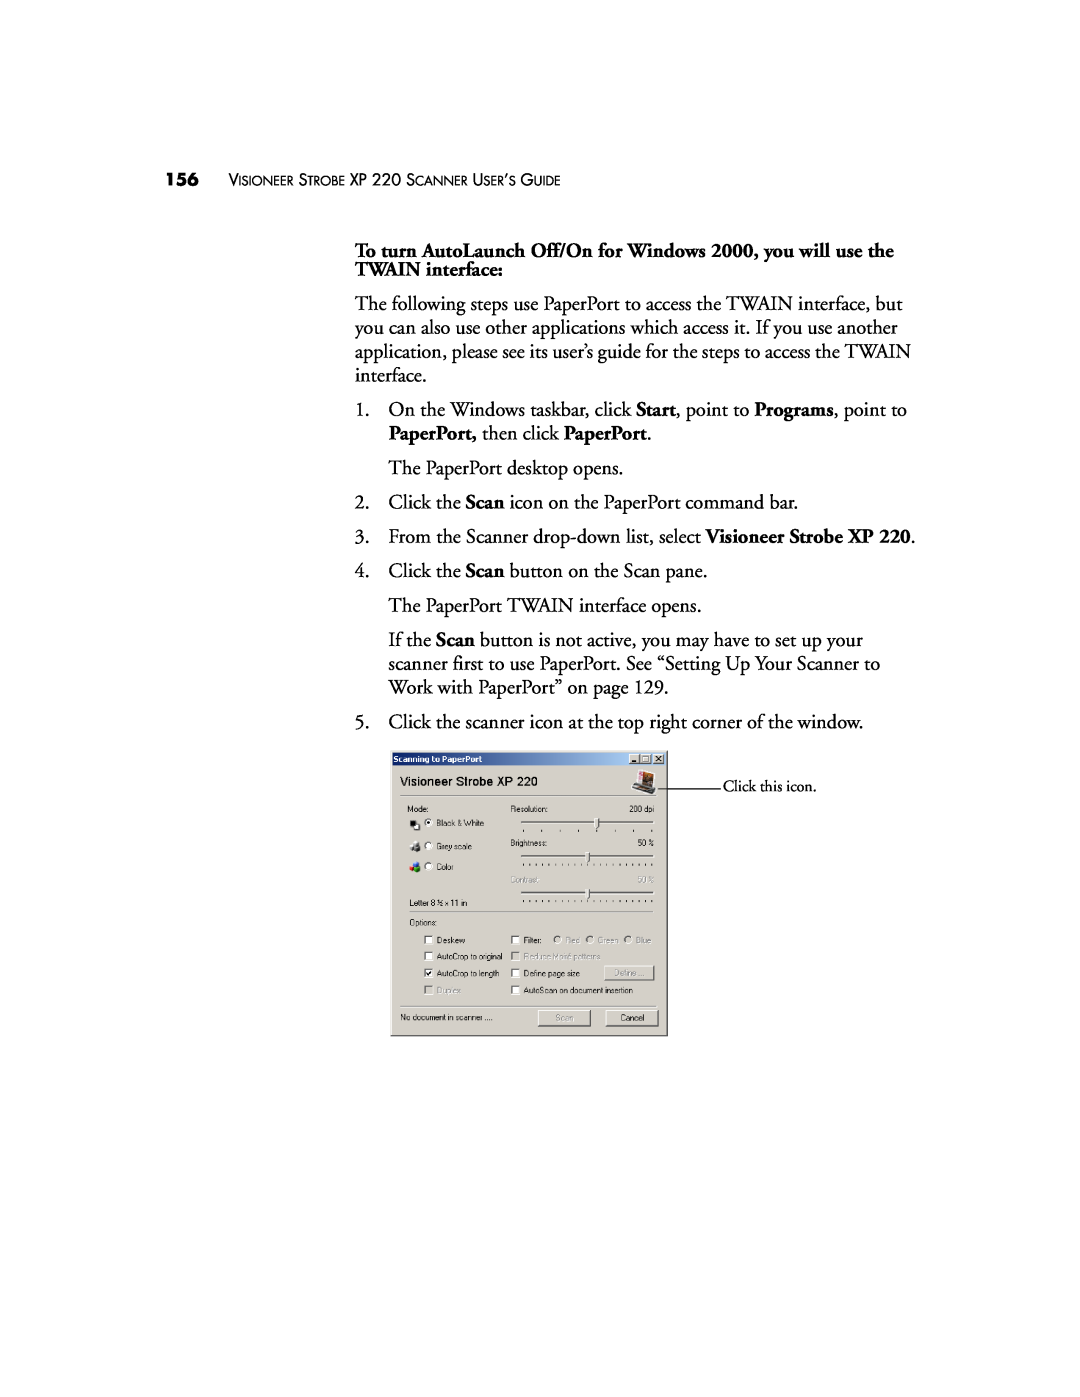 Visioneer XP220 manual To turn AutoLaunch Off/On for Windows 2000, you will use the, TWAIN interface 